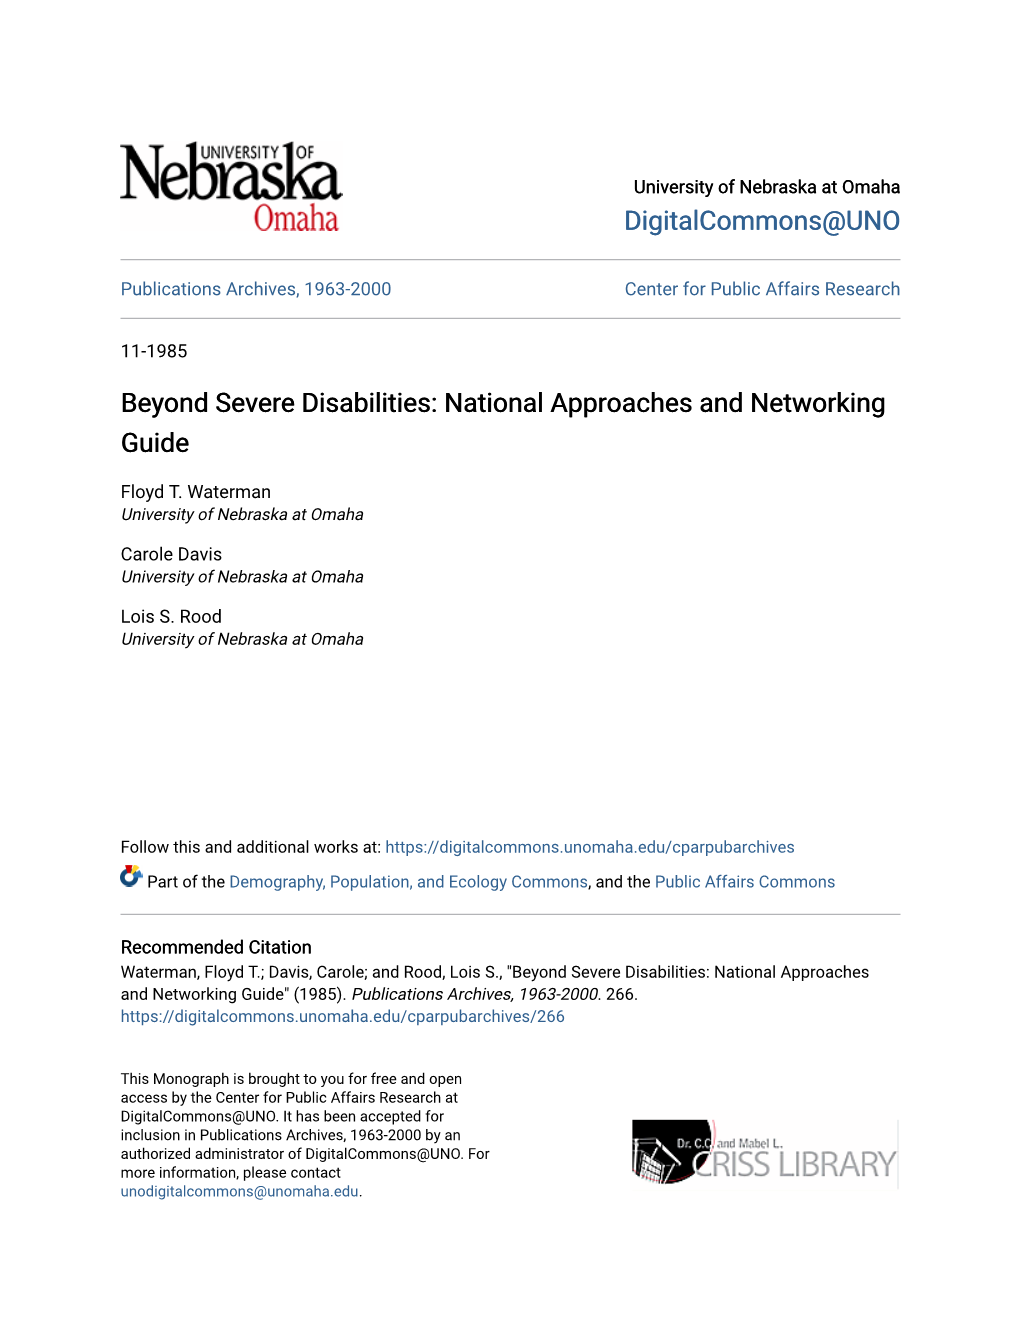 Beyond Severe Disabilities: National Approaches and Networking Guide